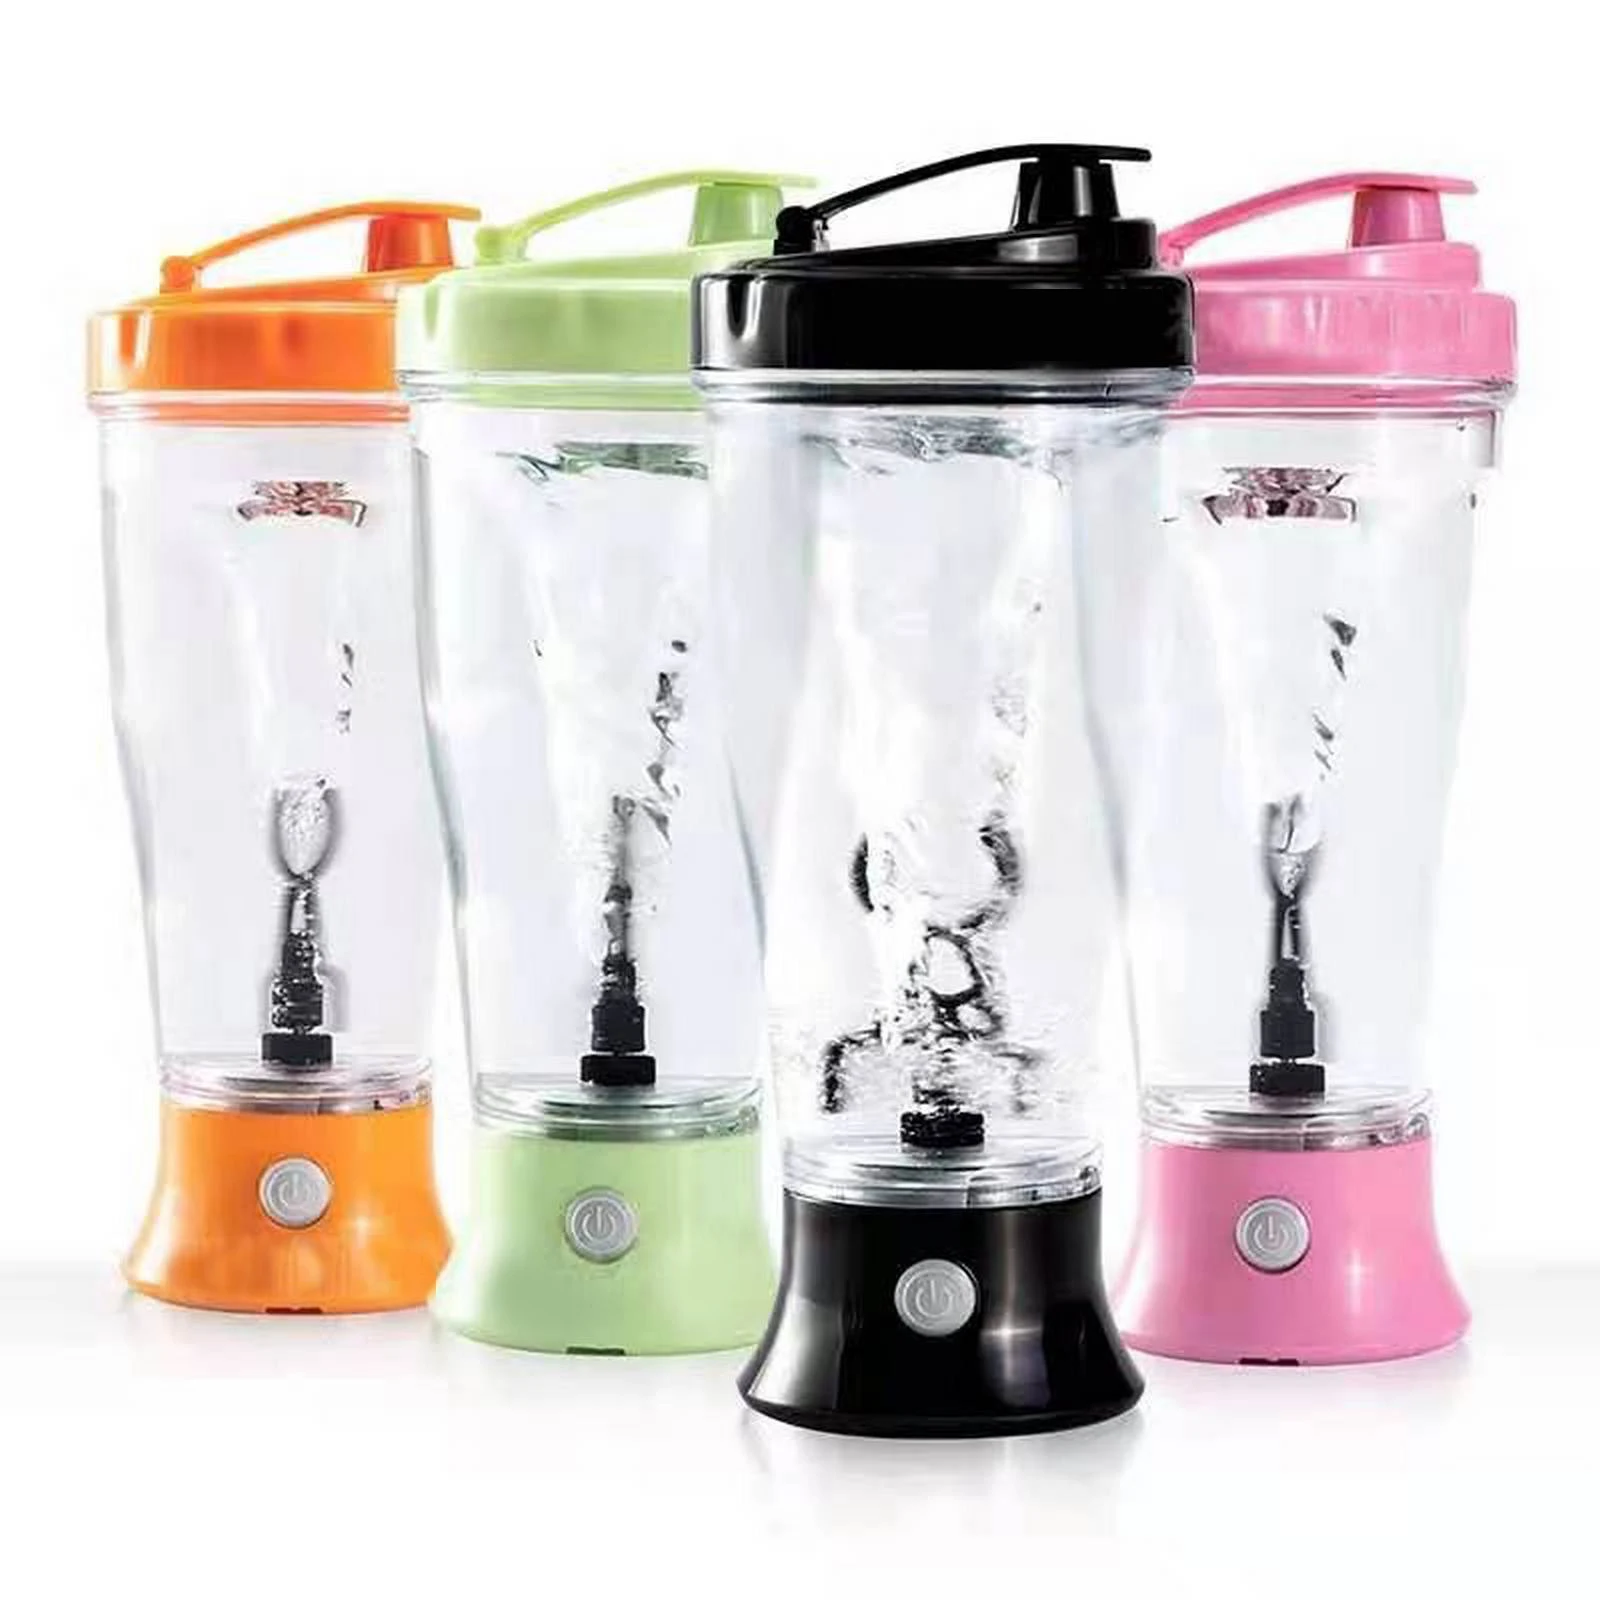 450/600ml Electric Protein Shaker Bottle USB Rechargeable Blender Portable  Protein Mixing Cup Gym Accessories For Home Kitchen - AliExpress